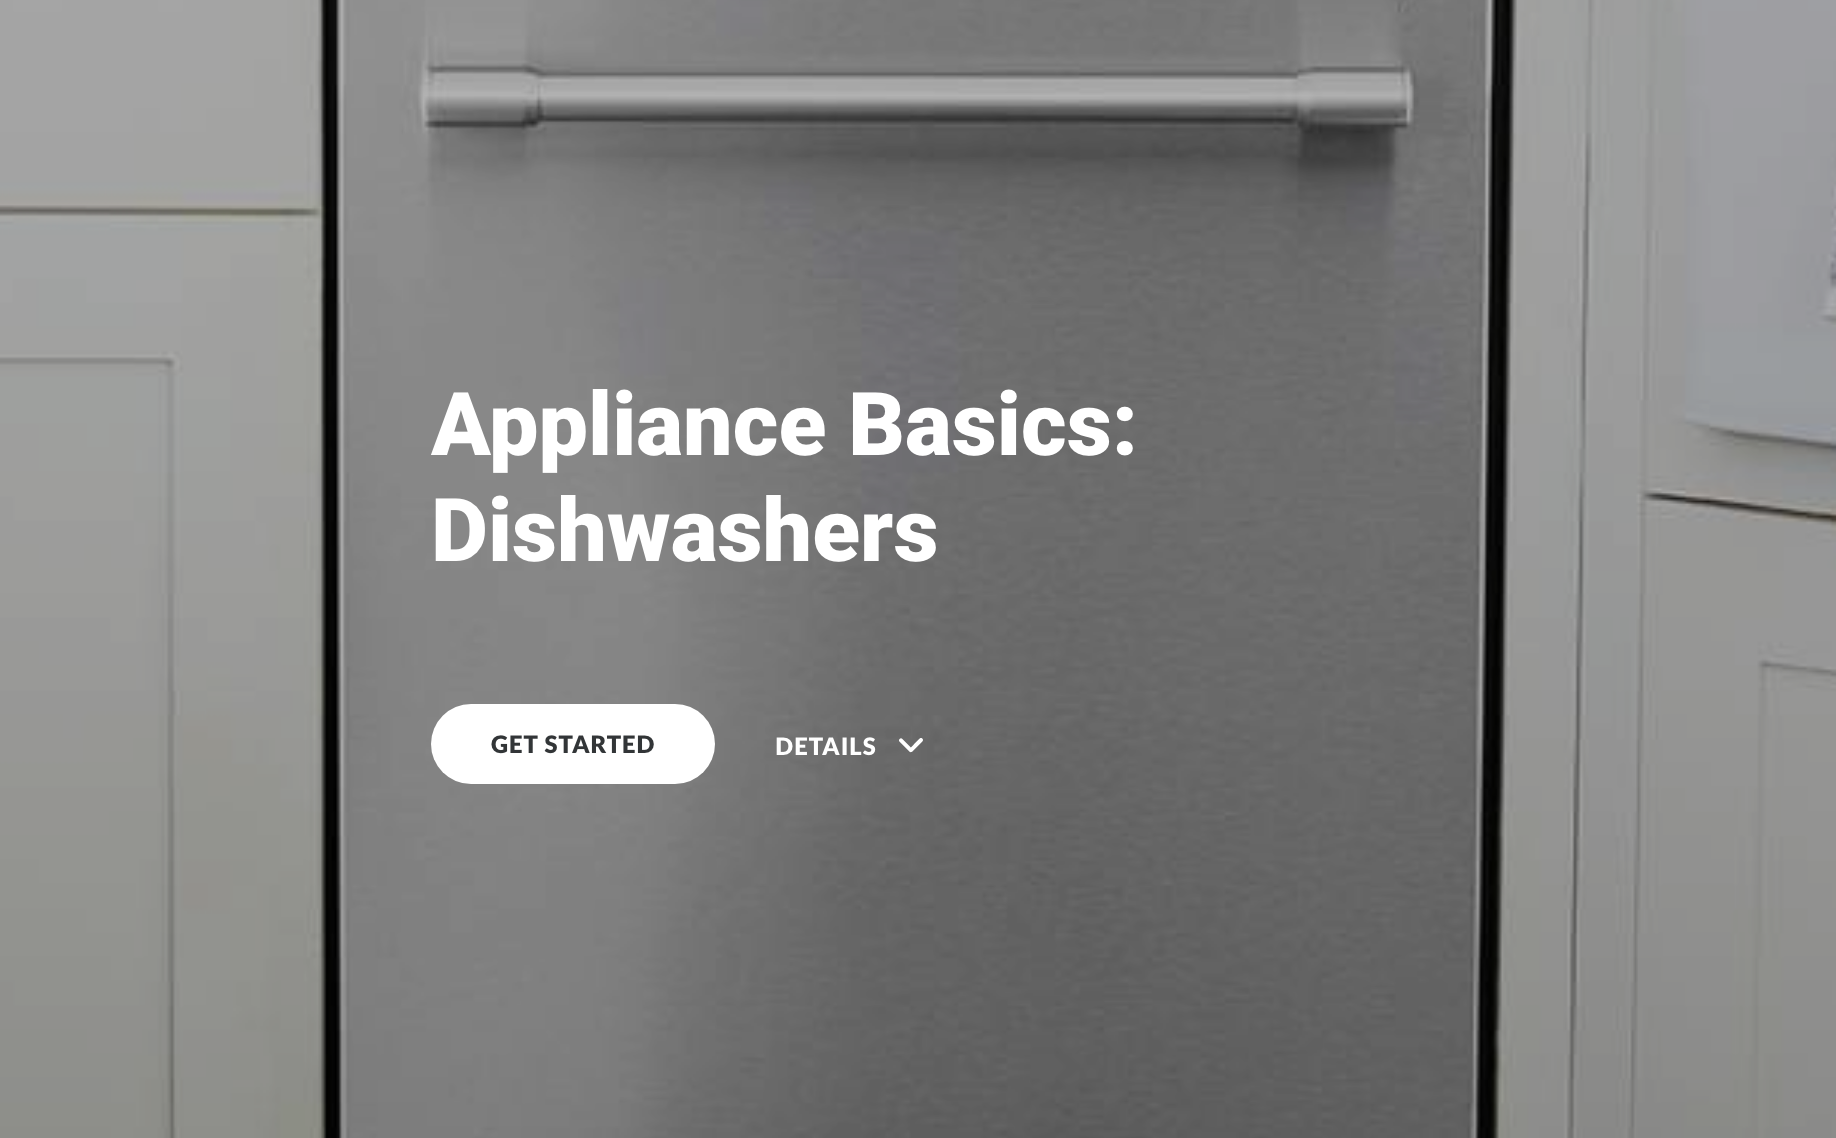 New to the appliance industry or need a refresher? This series of courses will provide you with a basic understanding of appliances, including how they operate, and basic parts and features. 